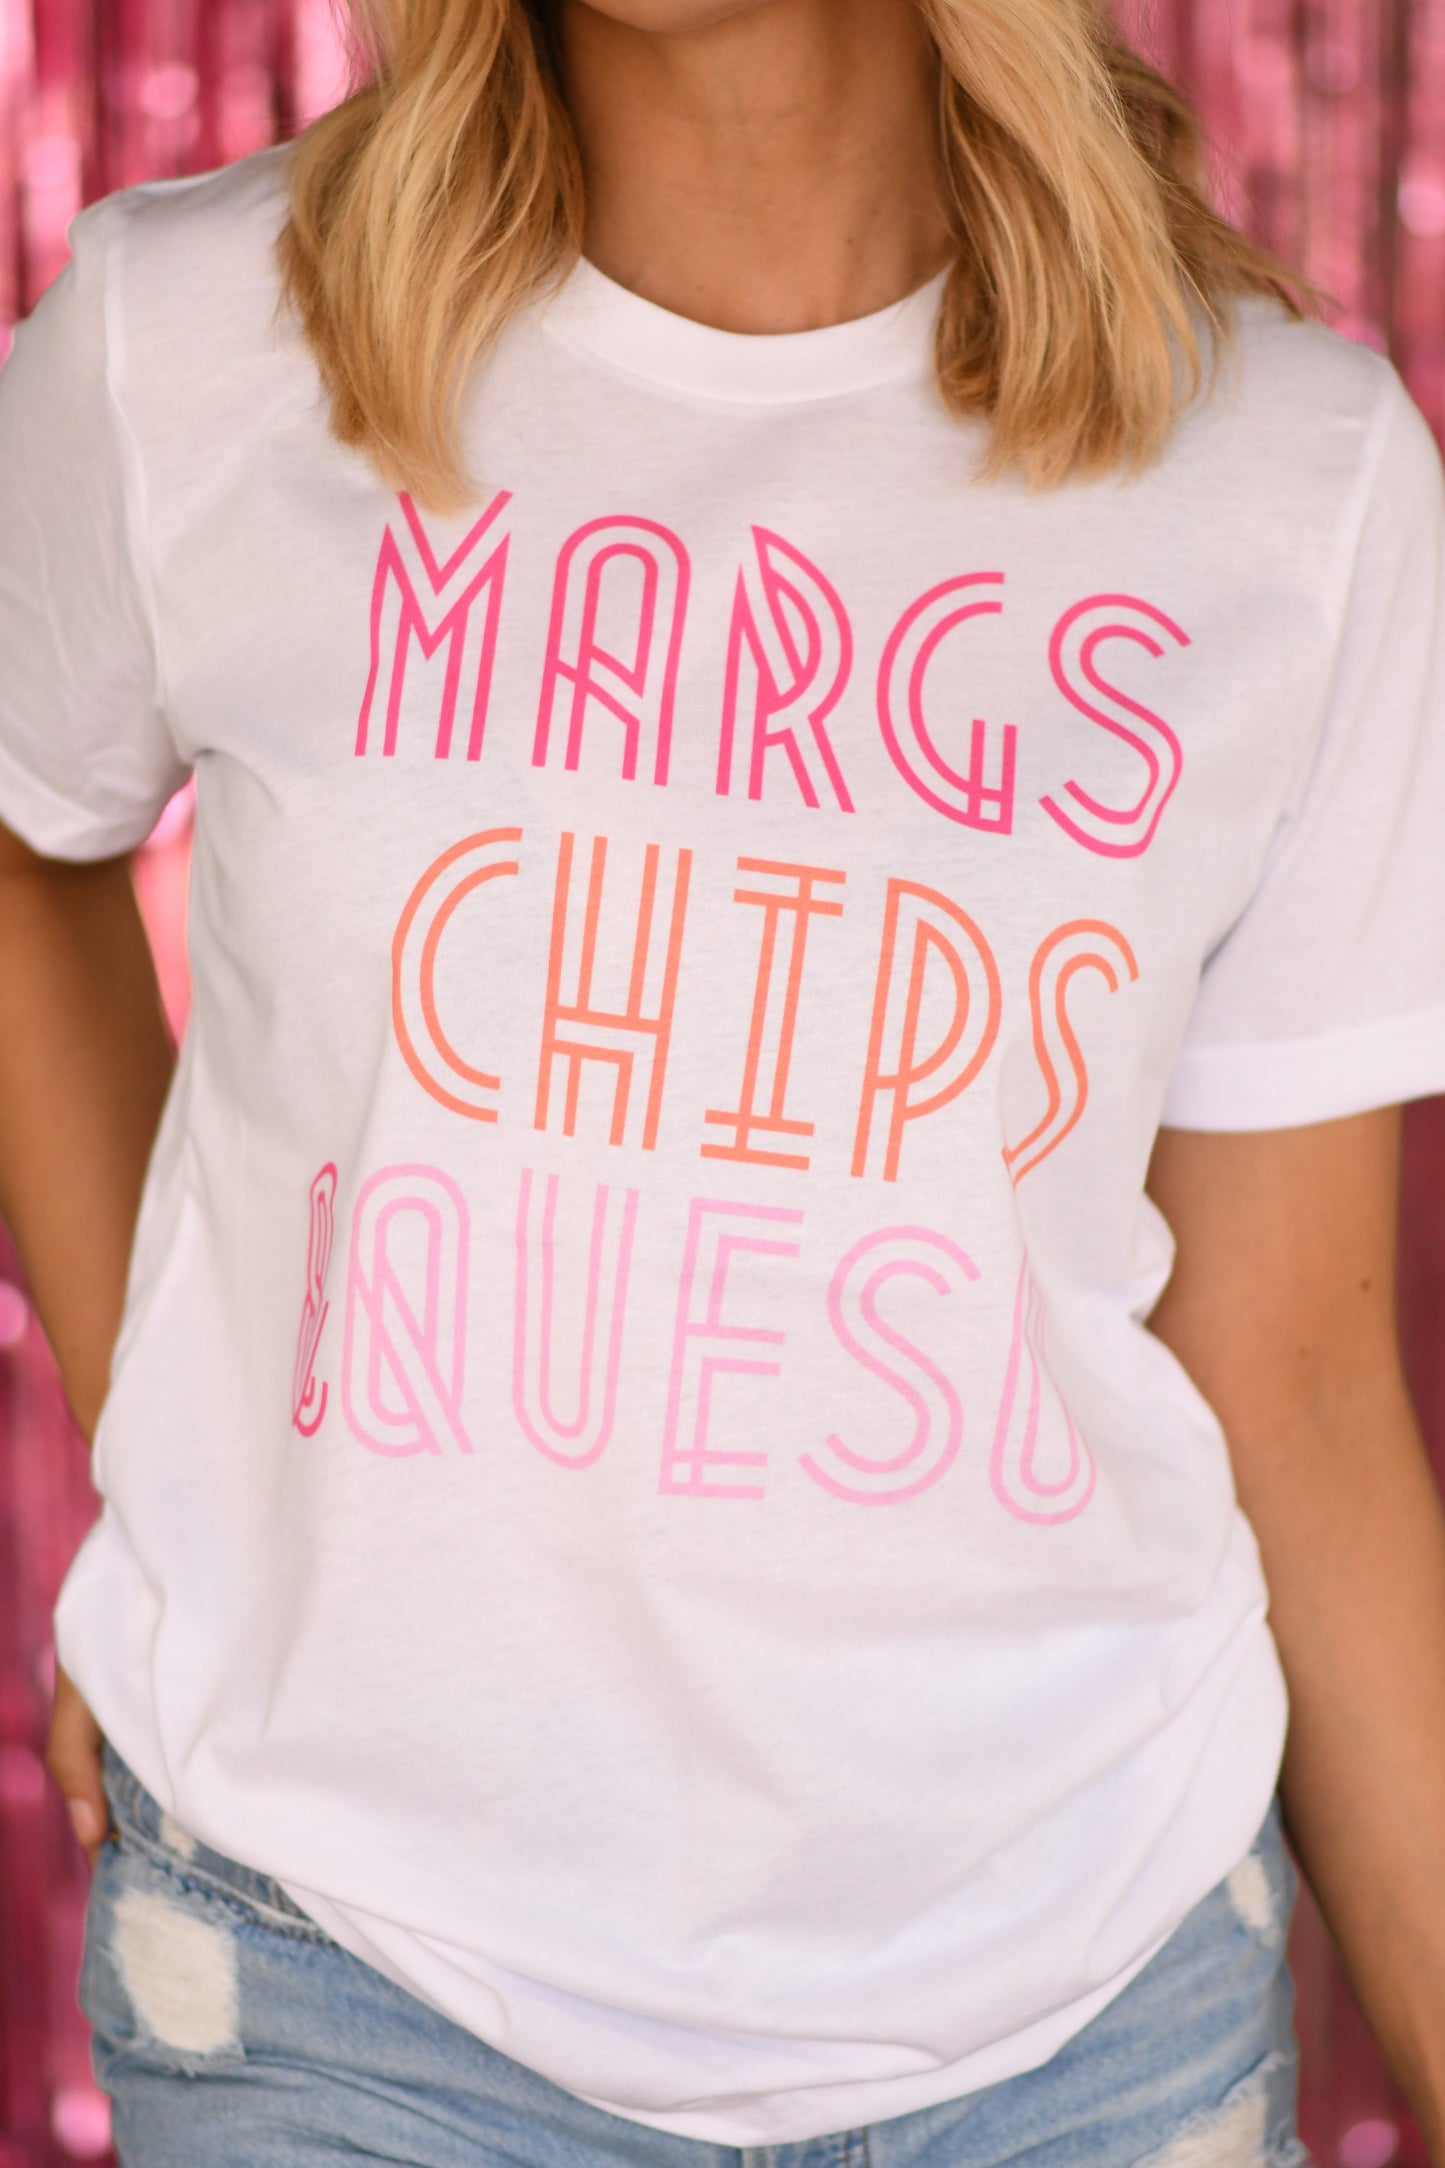 Margs Chips & Queso Tee